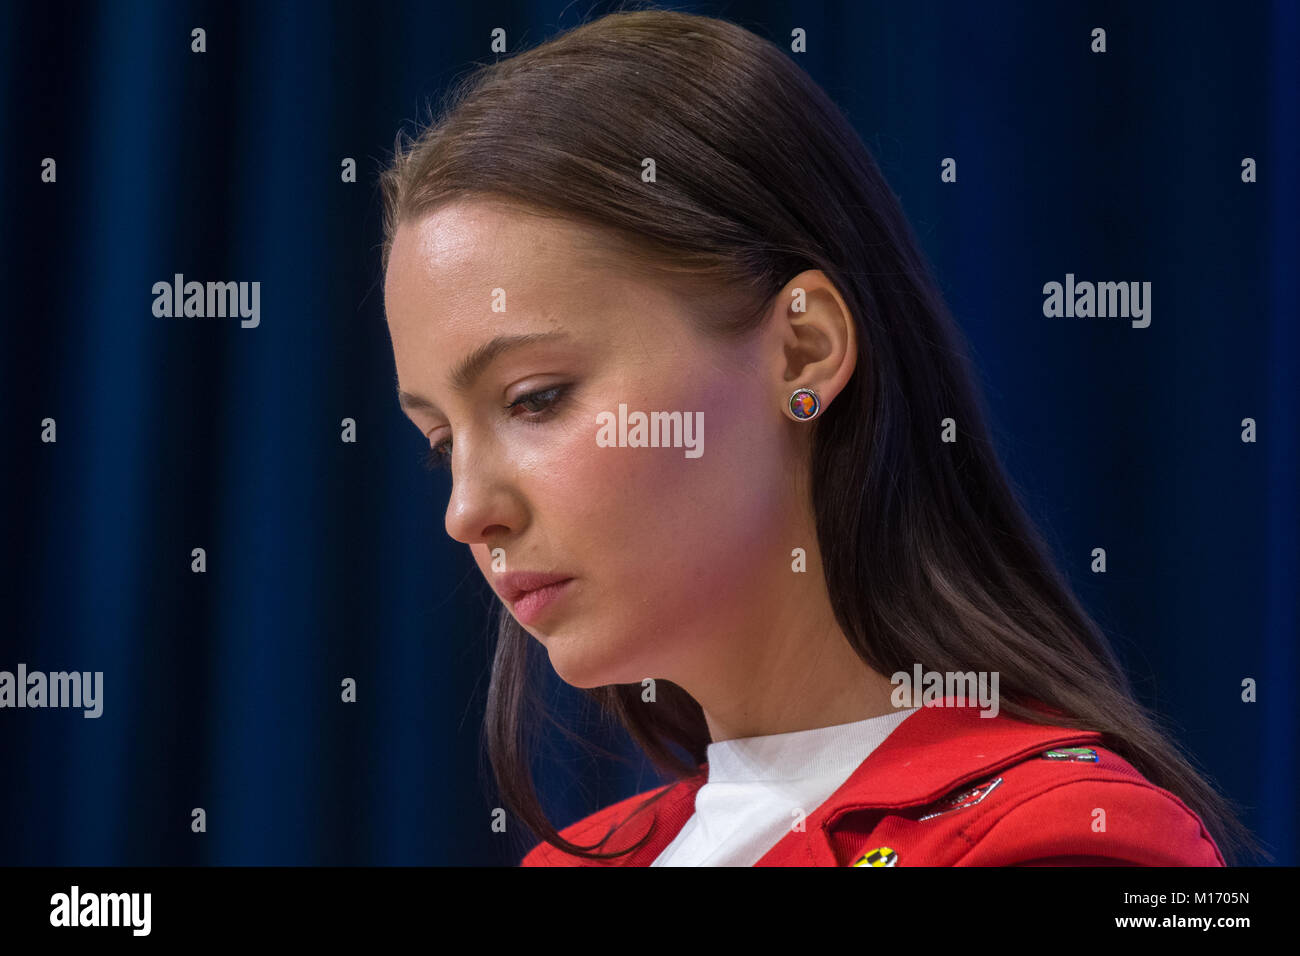 Moscow, Russia. 25th January, 2018. Actress Yulia Khlynina at a news conference ahead of the press-preview of the Selfie film at the Rossiya Segodnya news agency's international multimedia press center. Credit: Victor Vytolskiy/Alamy Live News Stock Photo